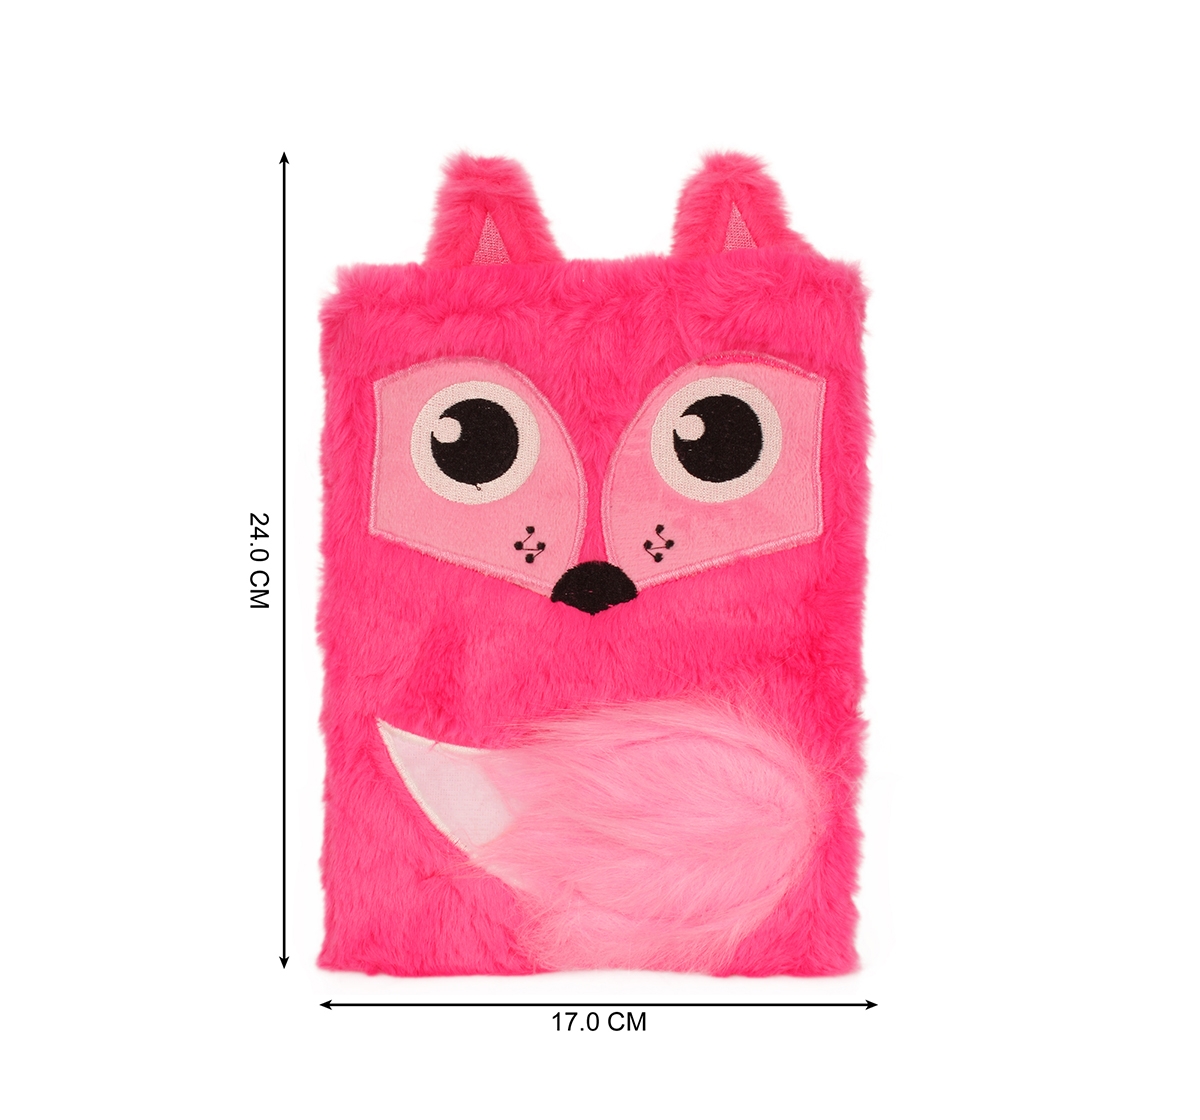 Mirada | Mirada  Whimsical Plush Fox Notebook - Study & Desk Accessories for Kids age 3Y+ (Pink) 4